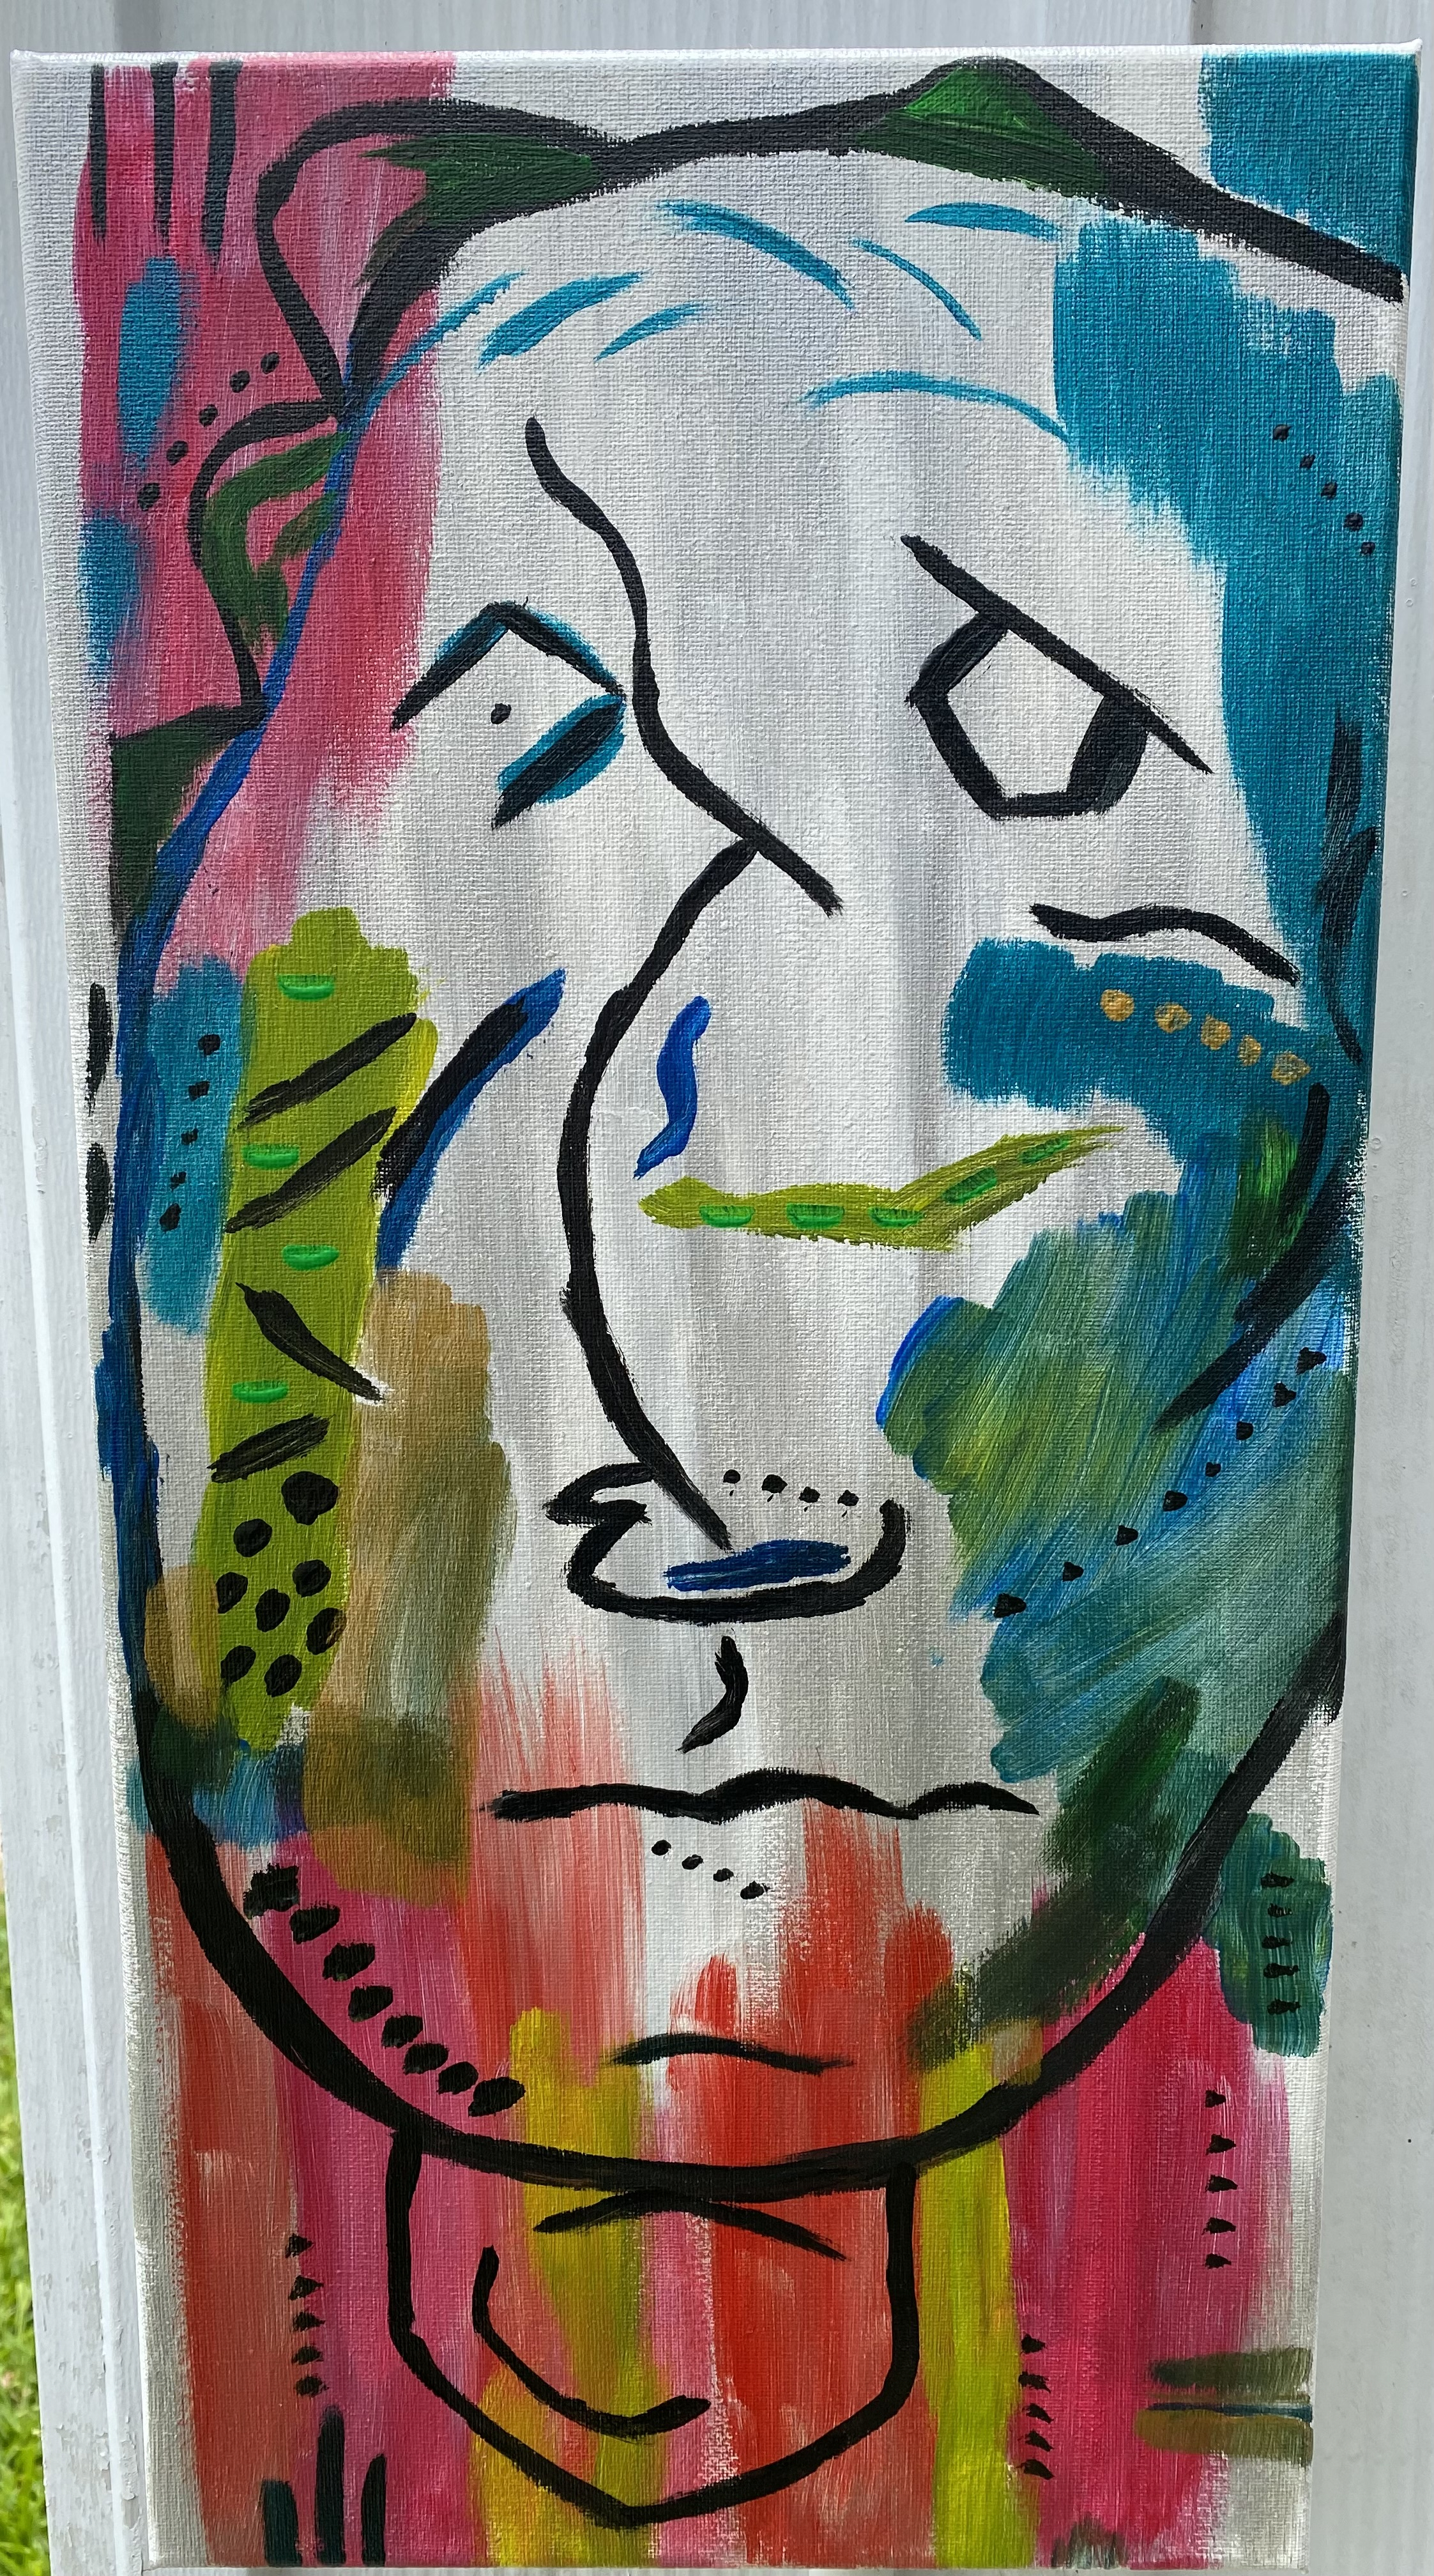 10in x 20in canvas with abstract face. silver and white prime the painting. brilliant pink, yellow, and red brush strokes come up from the lower section. hues of blue, green, yellow, and dark green are scattered throughtout the painting. three black lines appear in the upper left hand corner and the lower left hand corner.